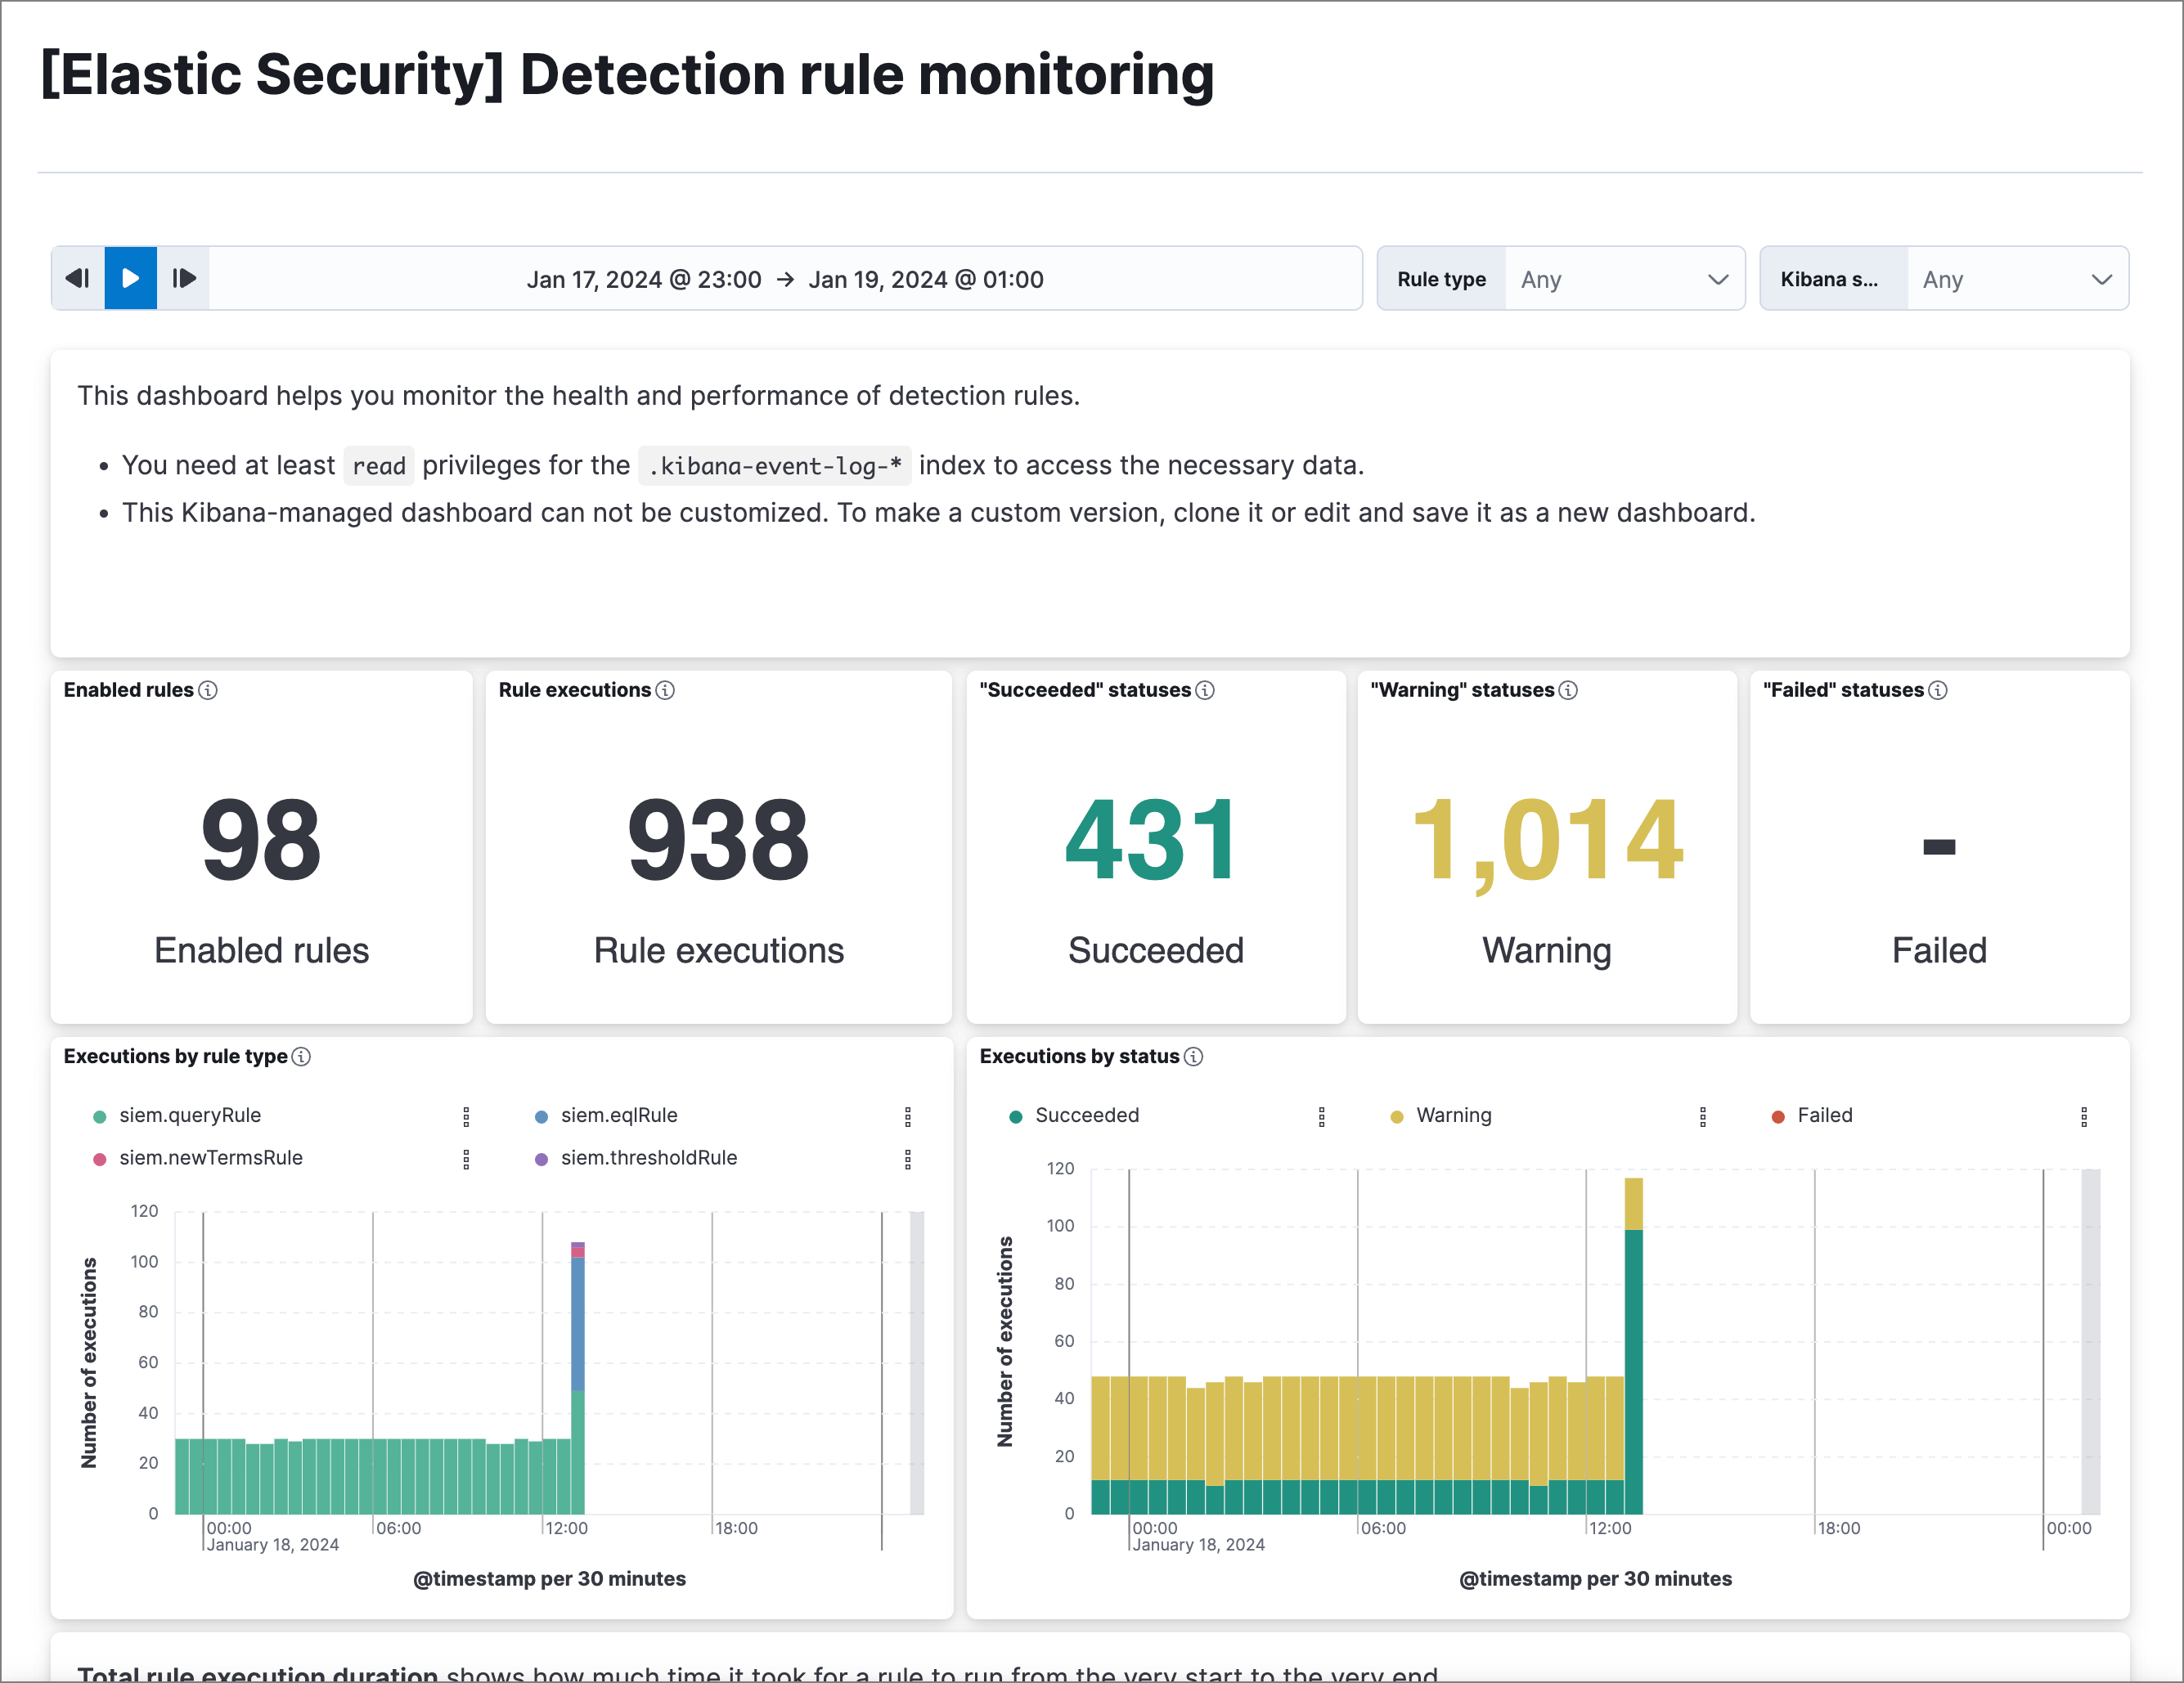 Overview of Detection rule monitoring dashboard